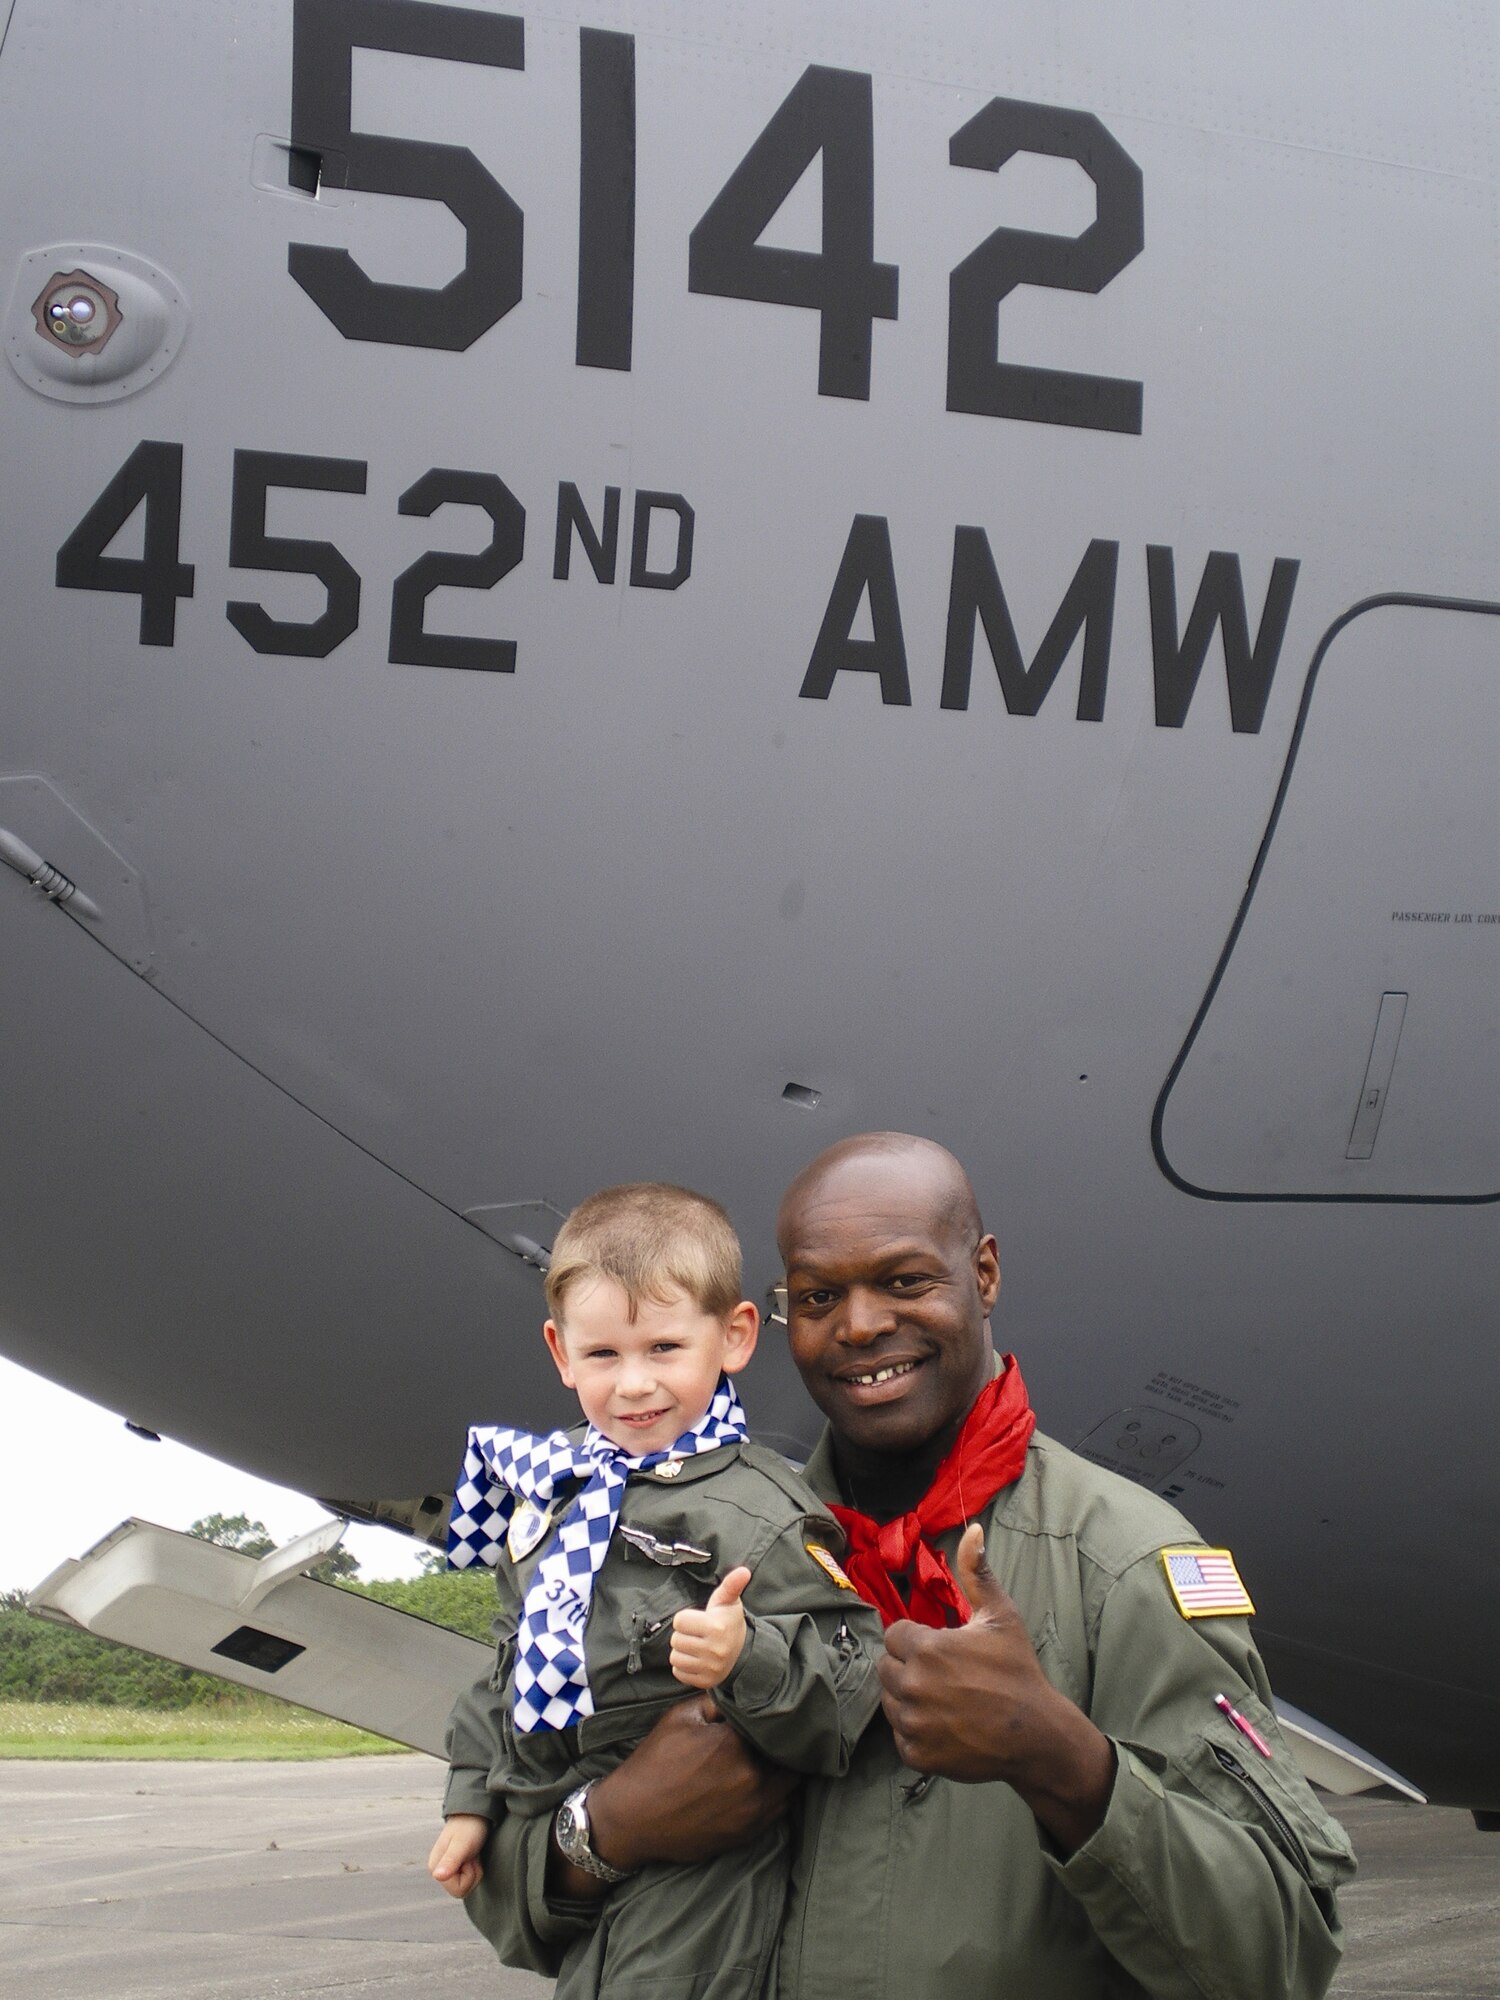 Staff Sgt. Winston Demmin, 729th Airlift Squadron Crew Chief, befriends the son
of Dennis Dennebouy, president of the Picauville Historical Society, Picauville, France, in June during a mission there. On the day of the crew’s departure, nearly the entire town came to the airport to see them off. According to other 729th troops, the young boy was “so enamored with Sergeant Winston that he begged our gentle giant to hold him for a picture.” The boy had his father make him an American flight suit for the occasion, complete with U.S. flag and wings, saying that when he grows up he “wants to be an American pilot.” (U.S. Air Force photo)